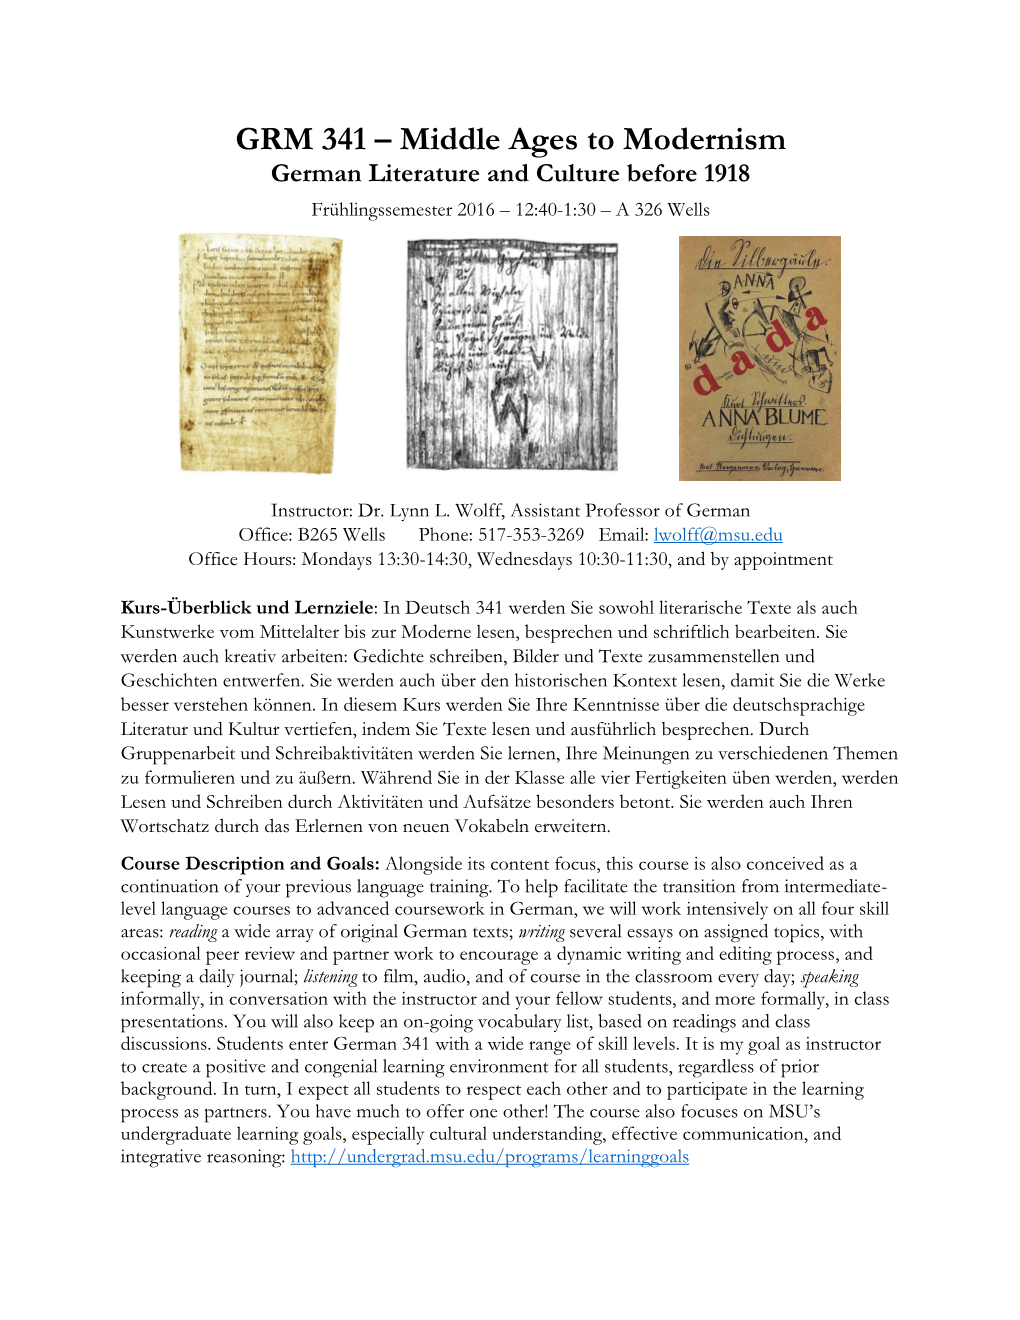 GRM 341 – Middle Ages to Modernism German Literature and Culture Before 1918 Frühlingssemester 2016 – 12:40-1:30 – a 326 Wells